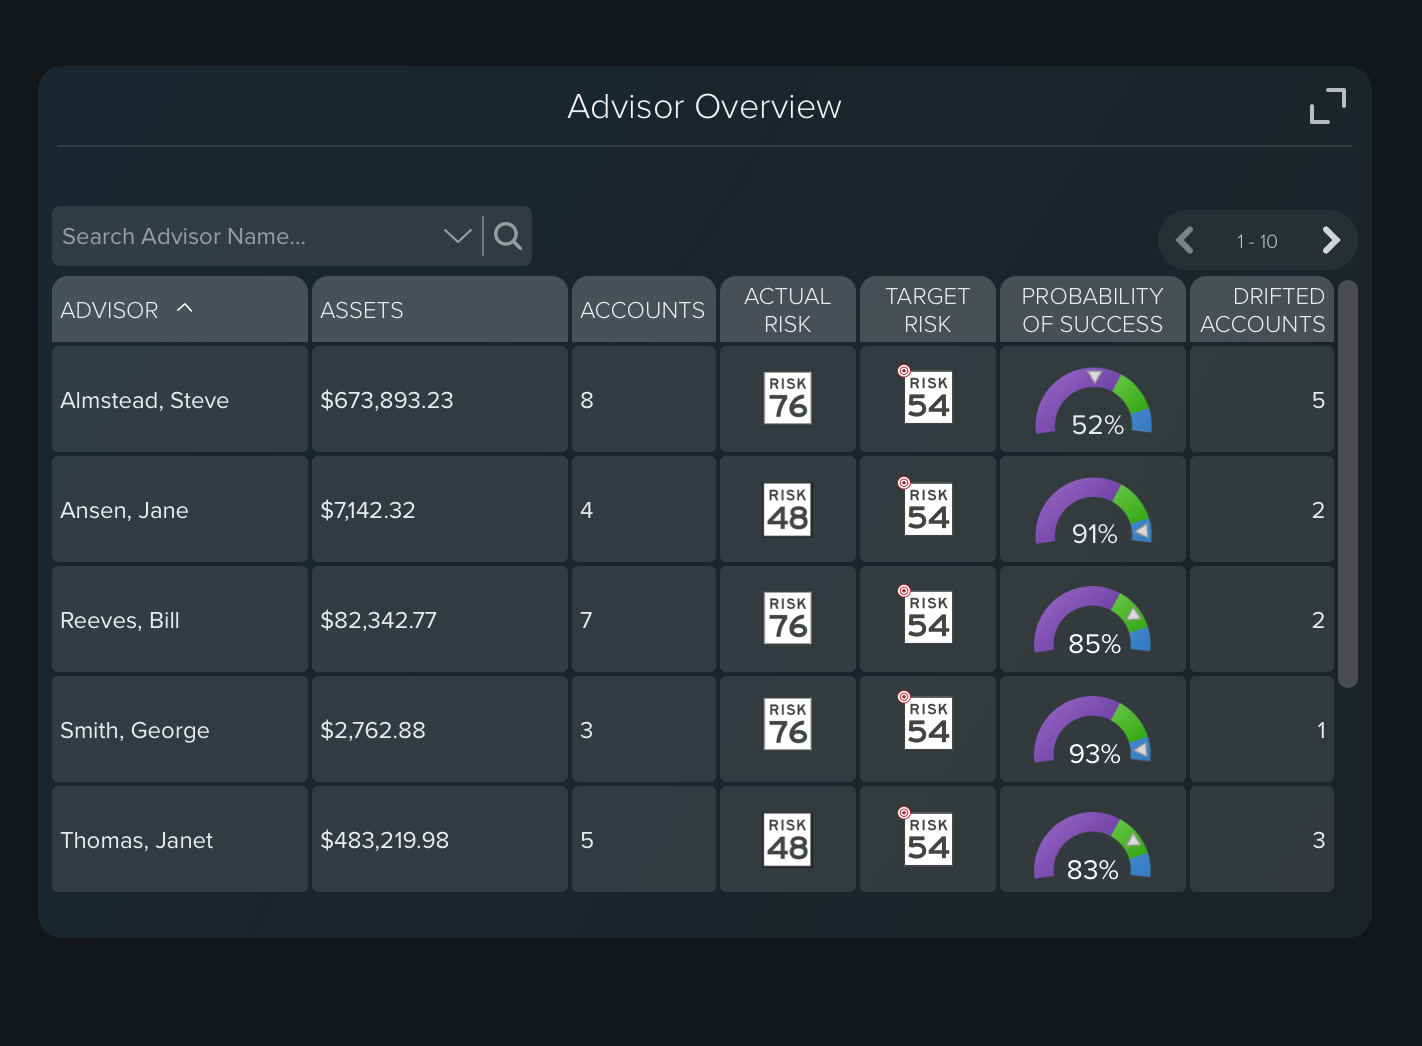 Advisor_Overview_1.png